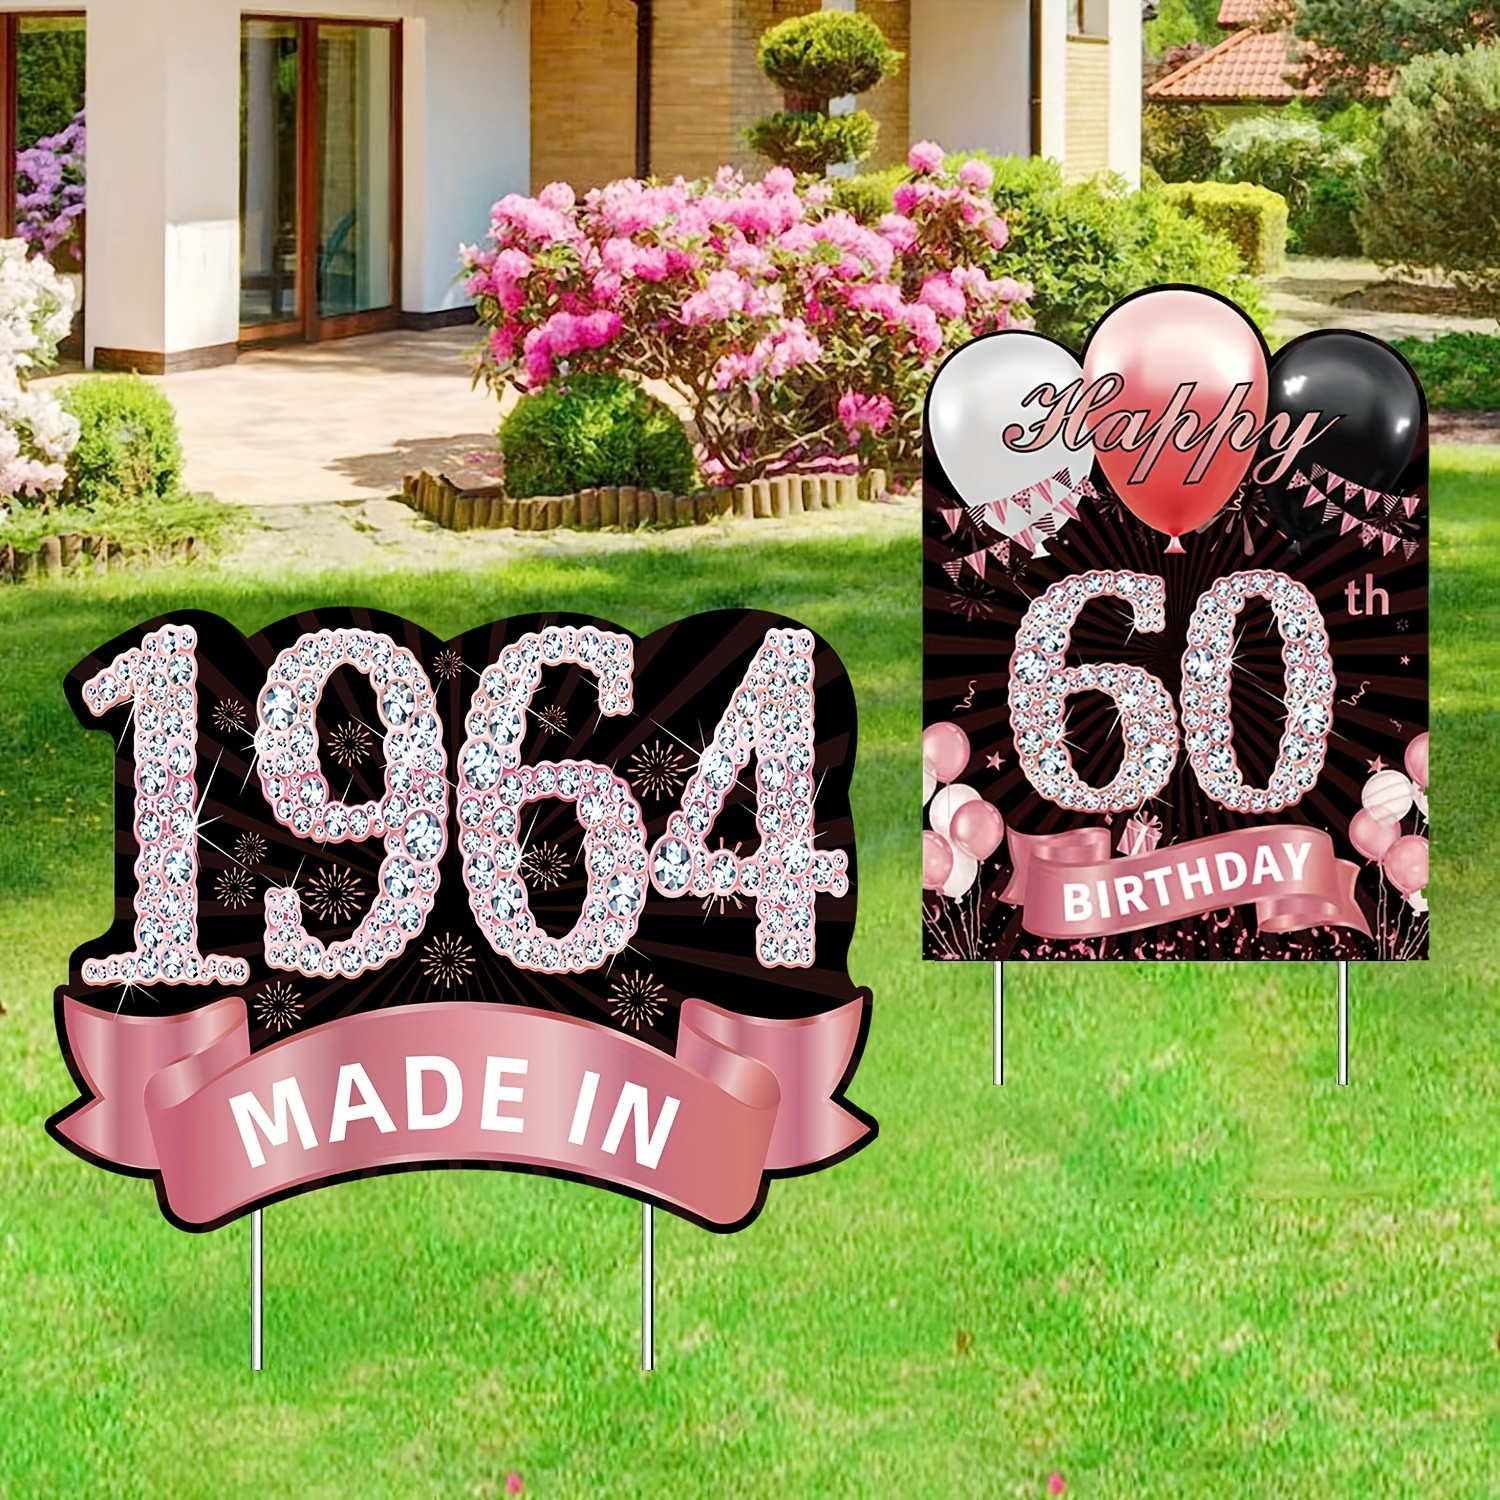 

2pcs Pink 60th Birthday Sign With Stakes, Born In 1964, Birthday Decorations For Garden Lawn, Outdoor Yard Signs Decorations, Yard Stakes For Party Decorations, 60th Birthday Party Supplies Props